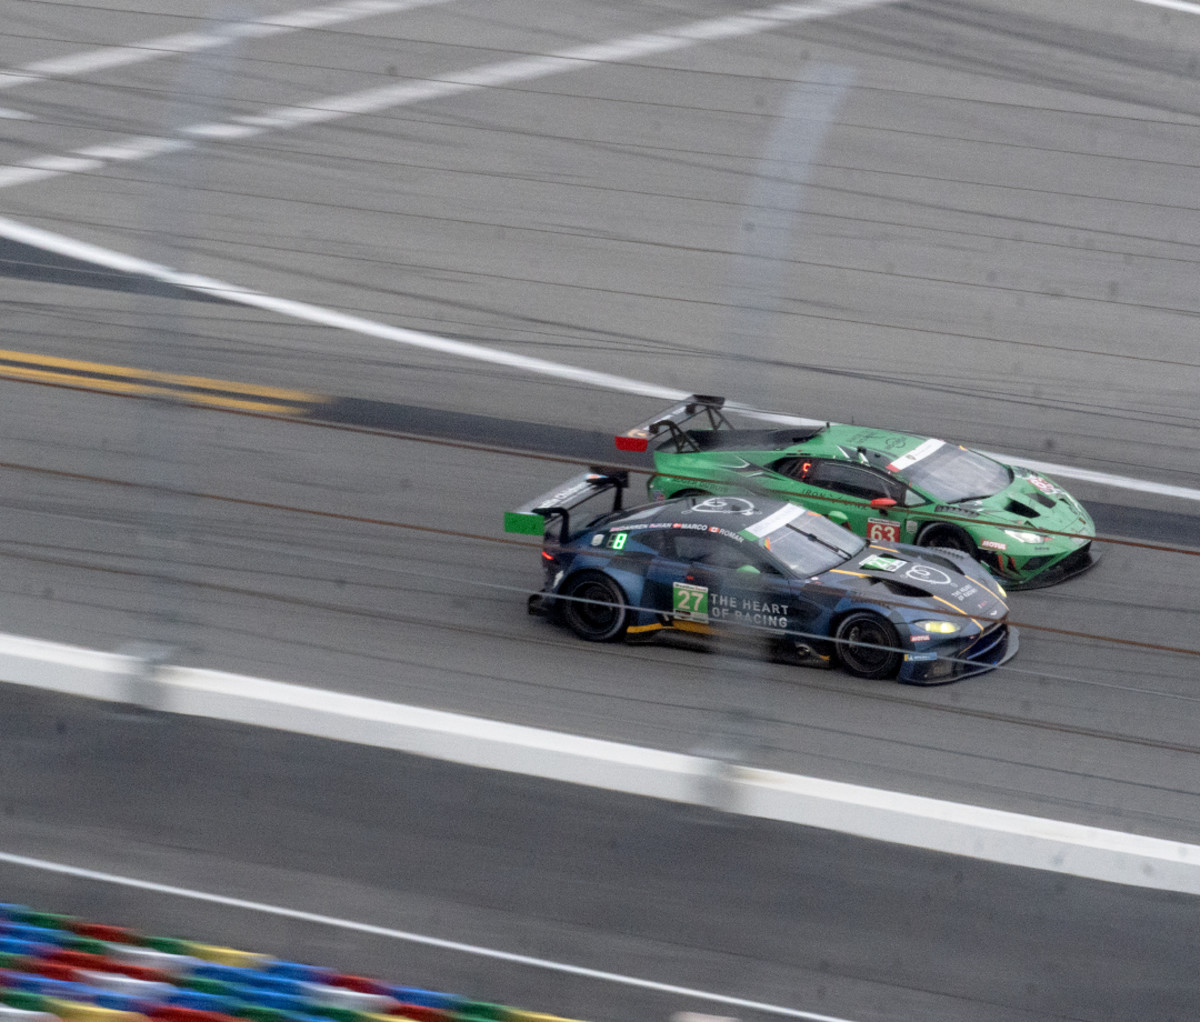 Two race cars driving next to each other at the Rolex 24 at Daytona endurance race.